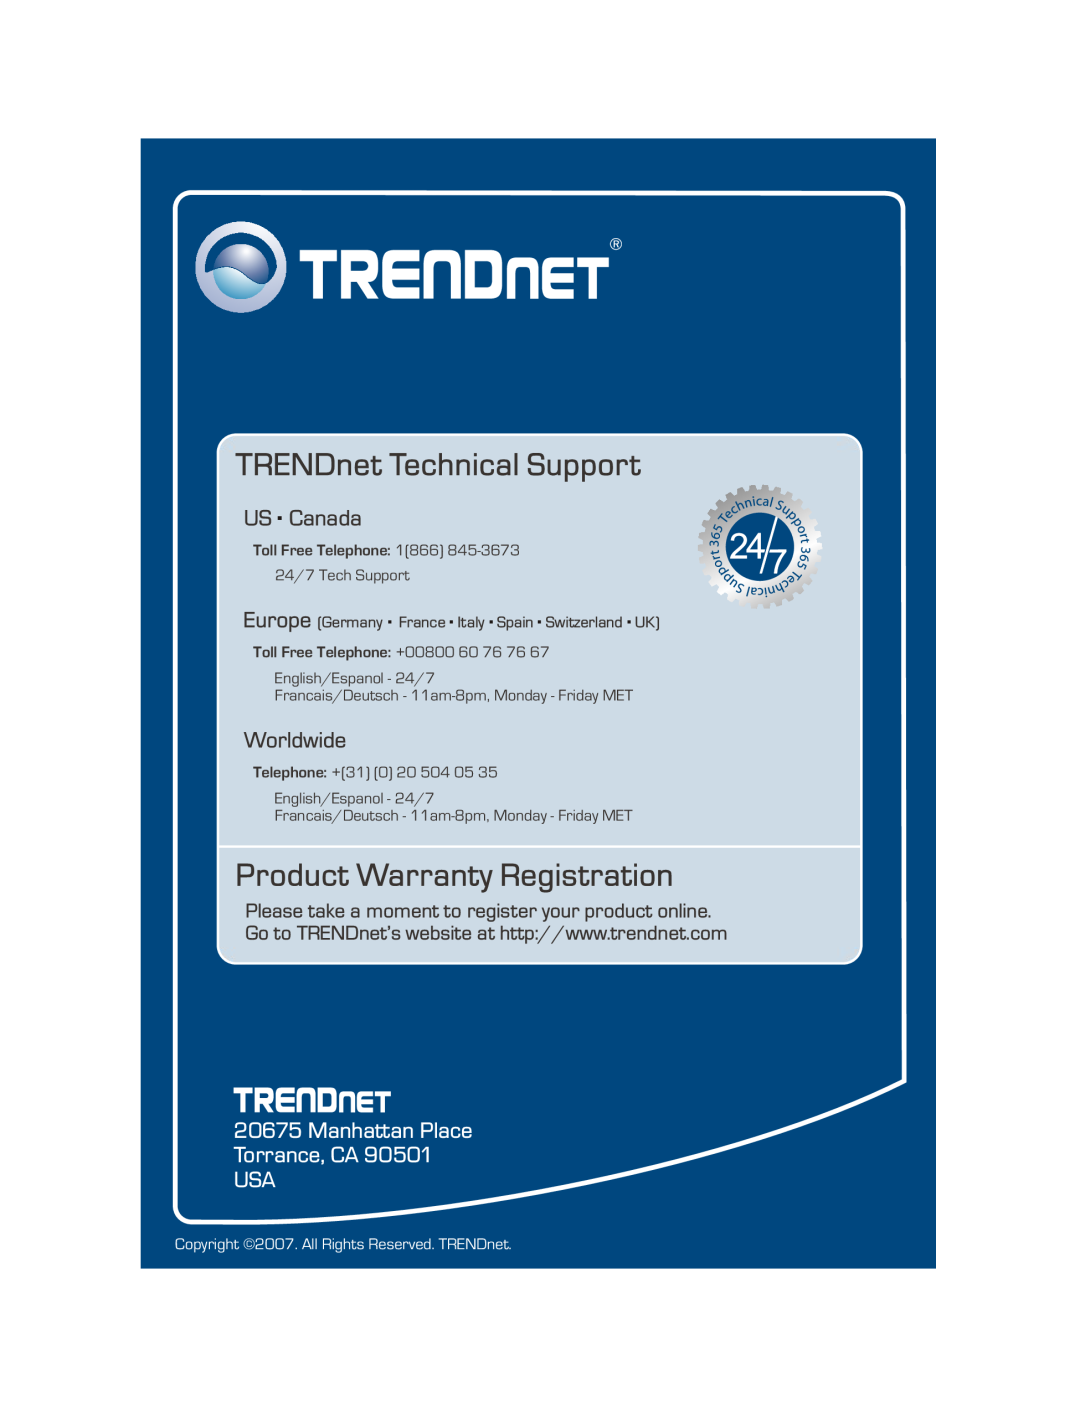 TRENDnet TPL-210AP TRENDnet Technical Support, Product Warranty Registration, US . Canada, Worldwide, Toll Free Telephone 